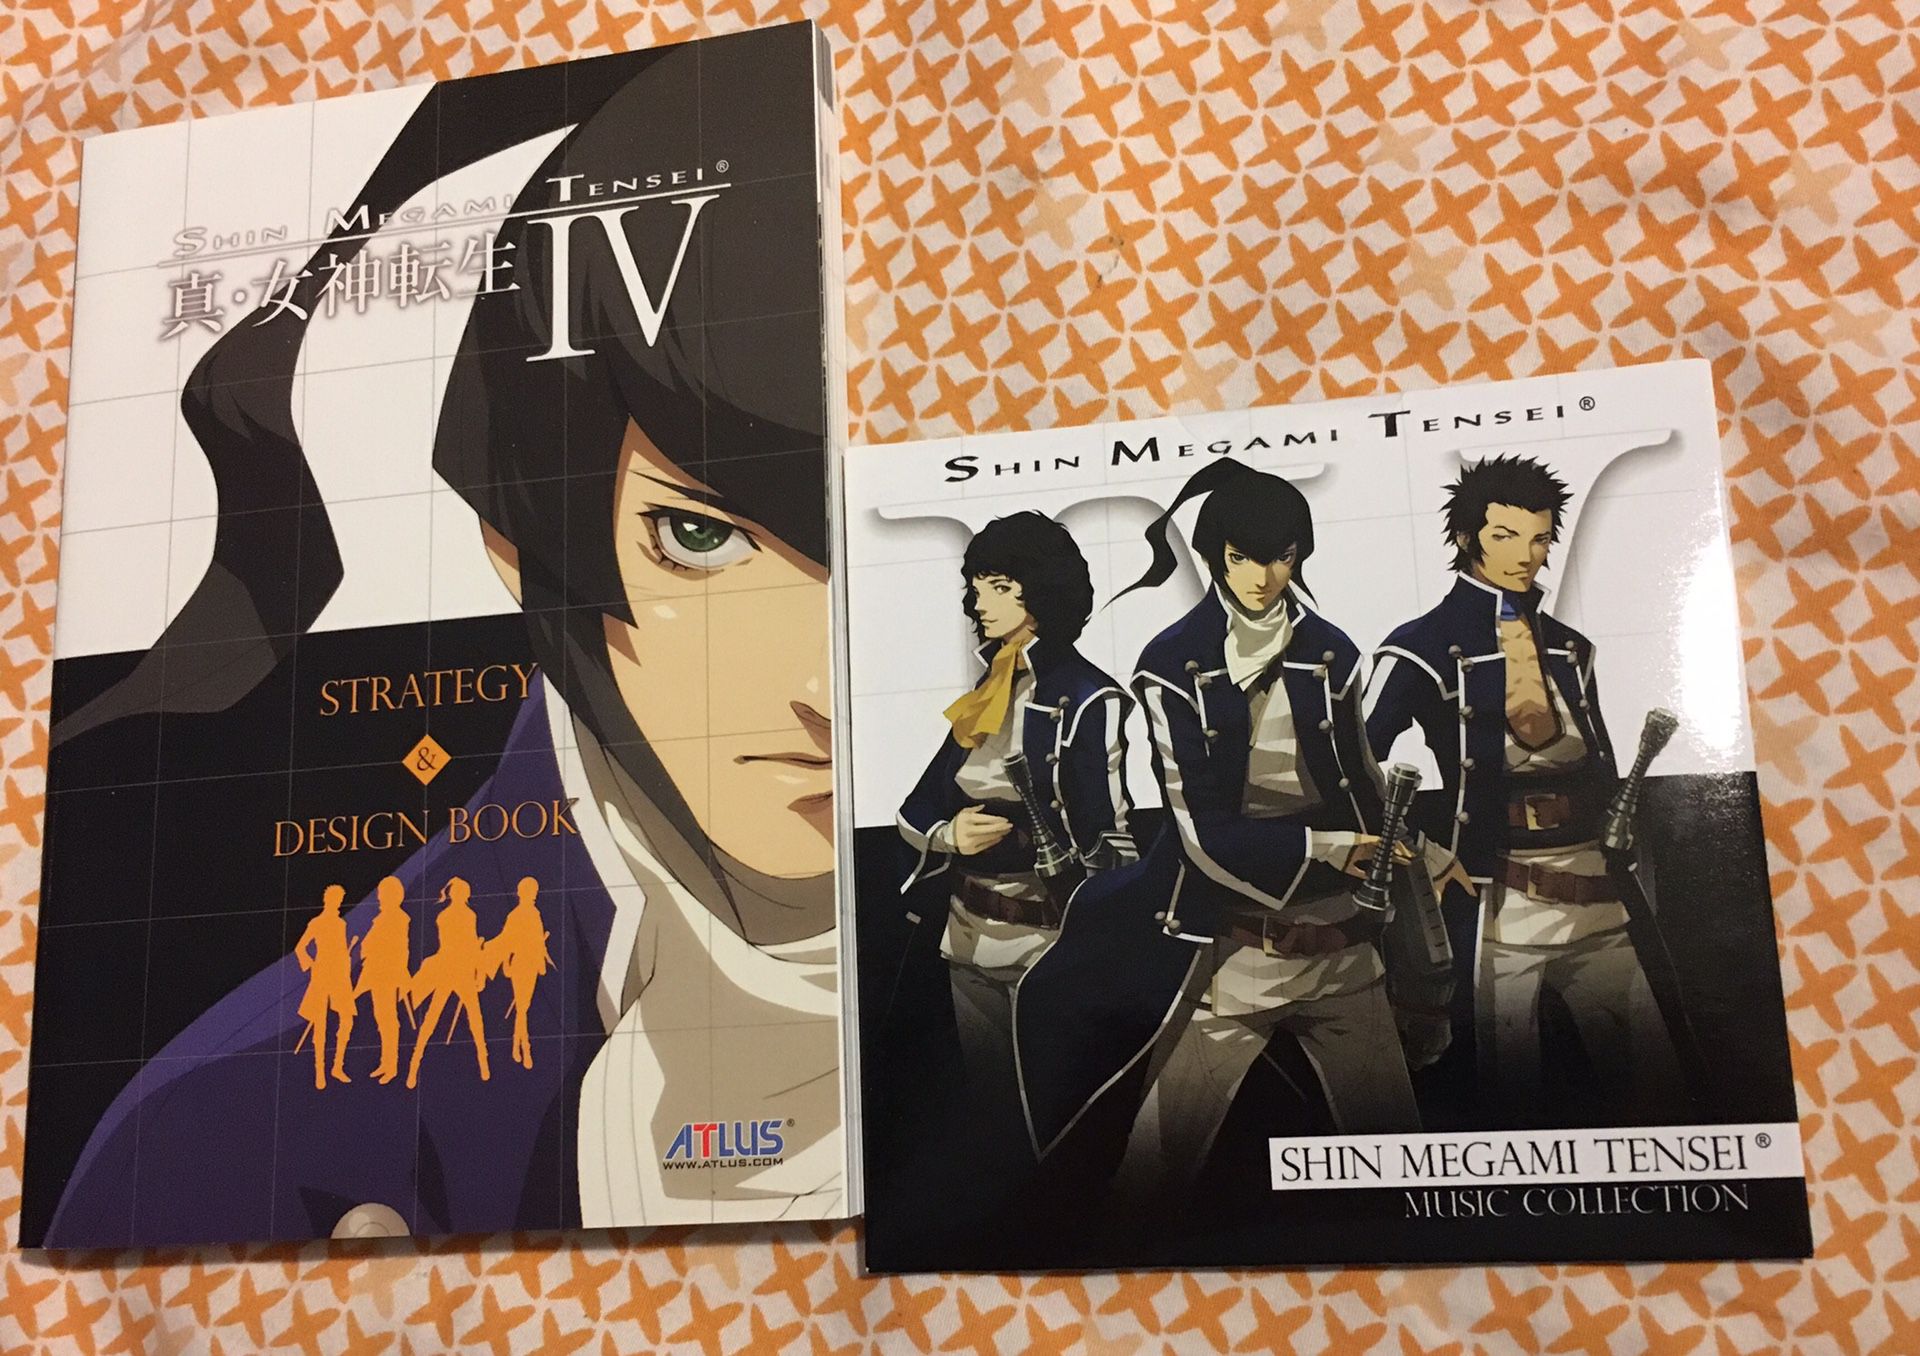 Shin Megami Tensei IV Strategy & Design Book and Music Collection CD $5 for all